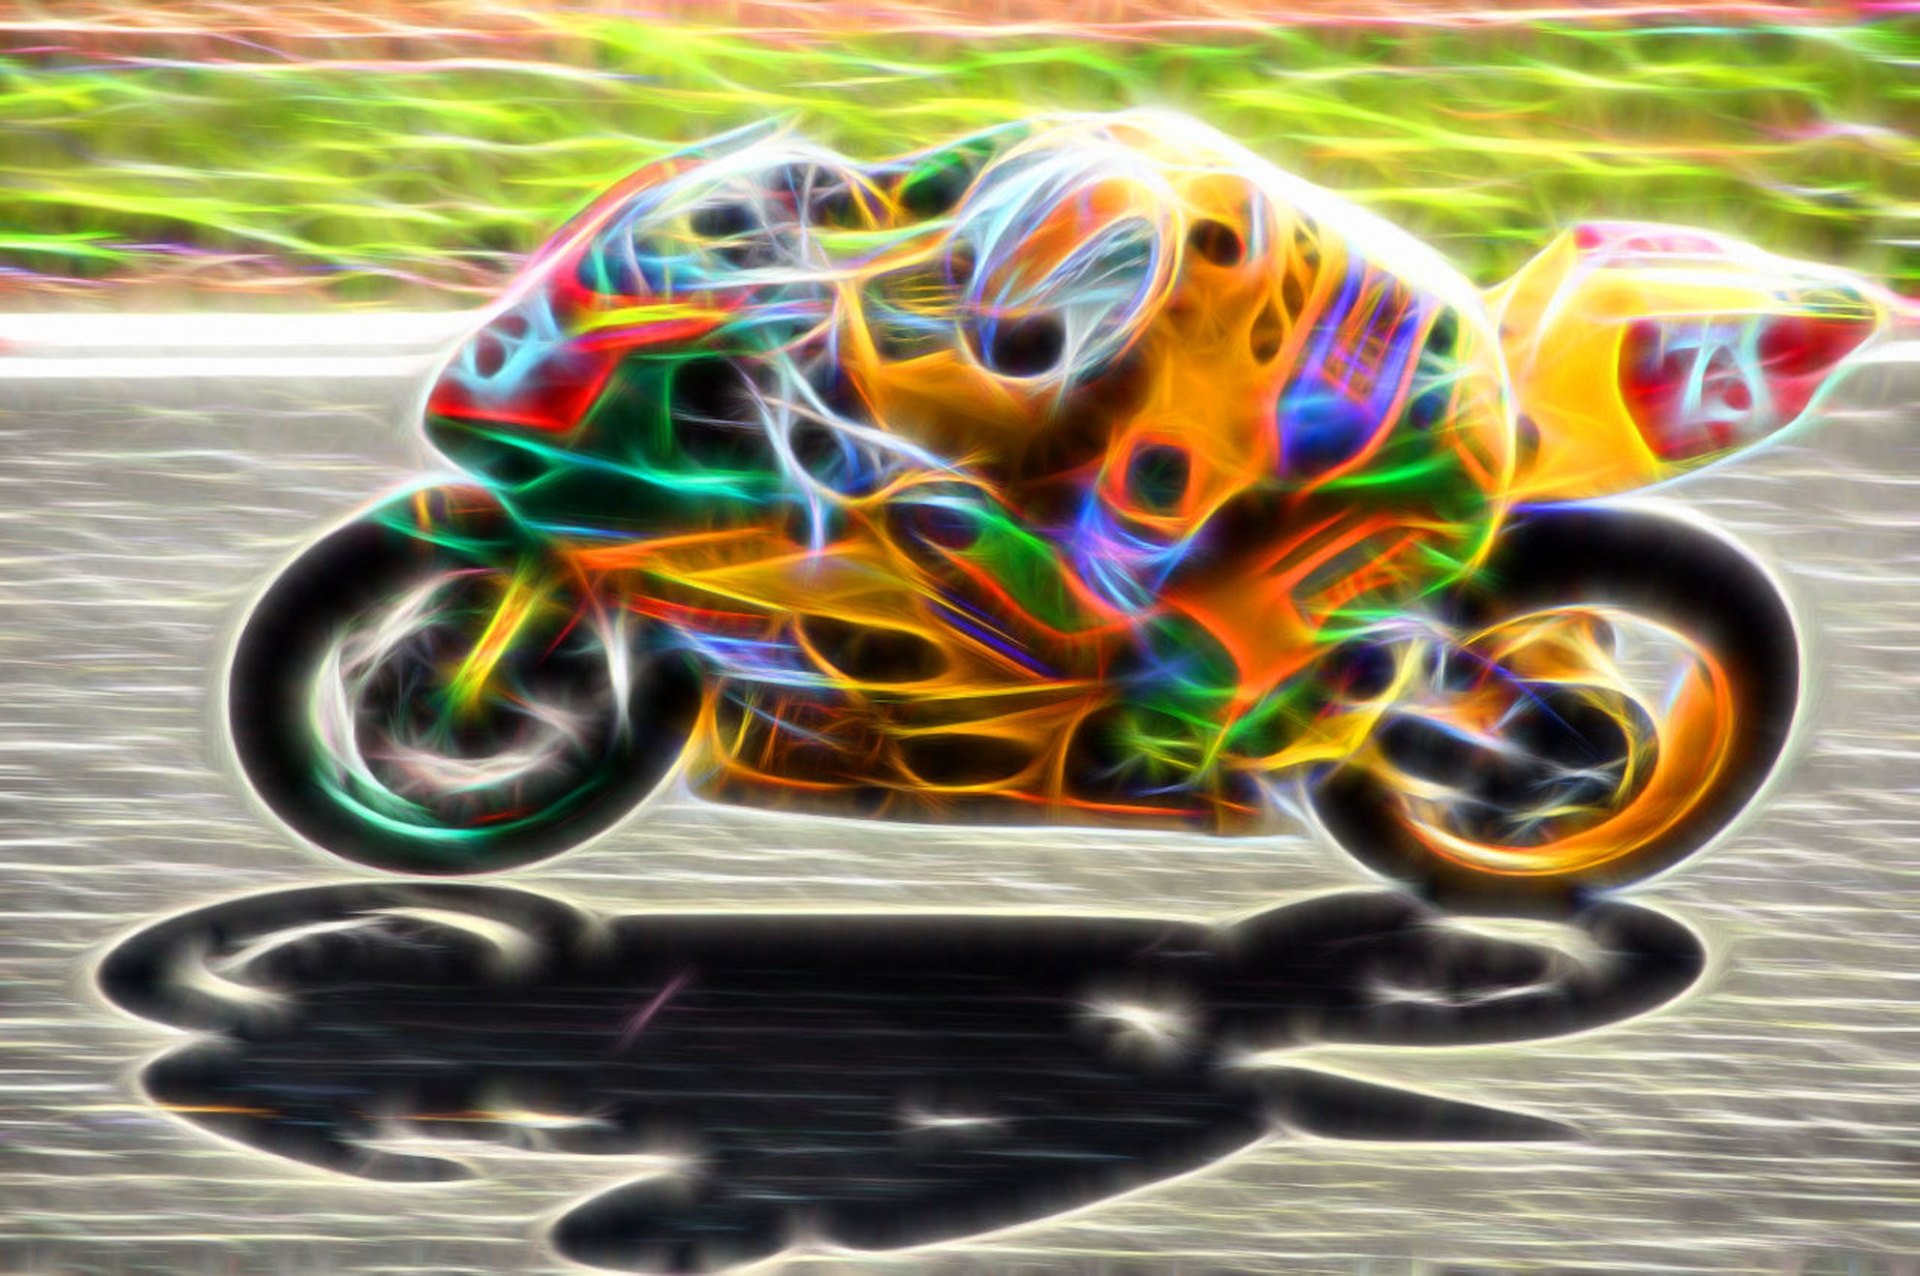 Motorcycle Neon Graphic Free Photo - Sport Motorcycle Birthday Cards - HD Wallpaper 